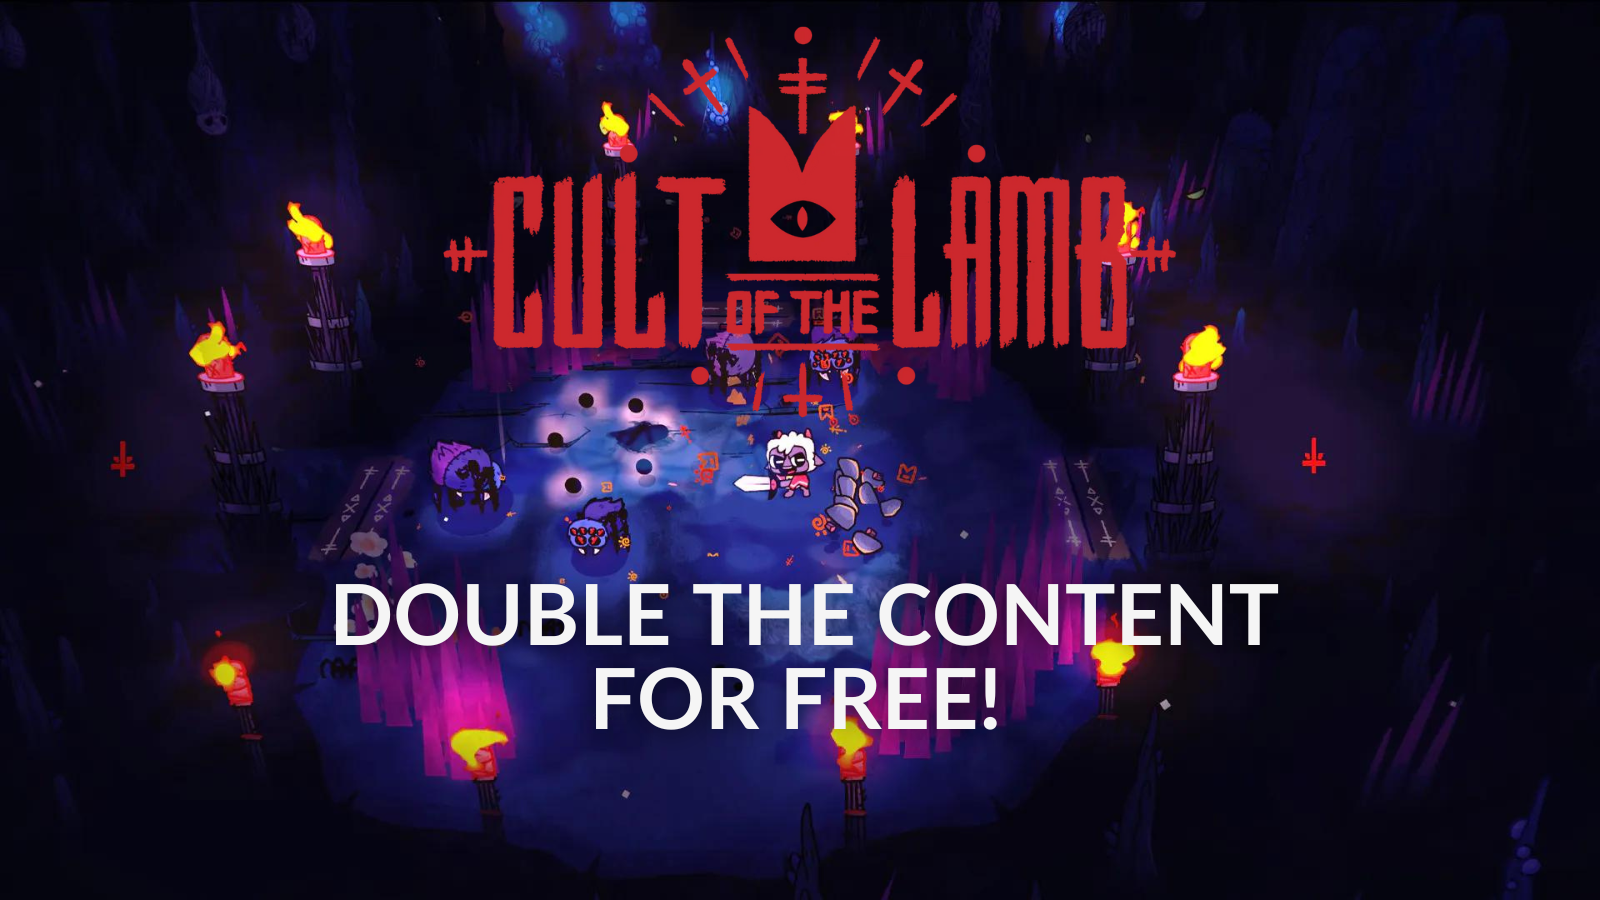 Cult of the Lamb system requirements – No GPU sacrifice required